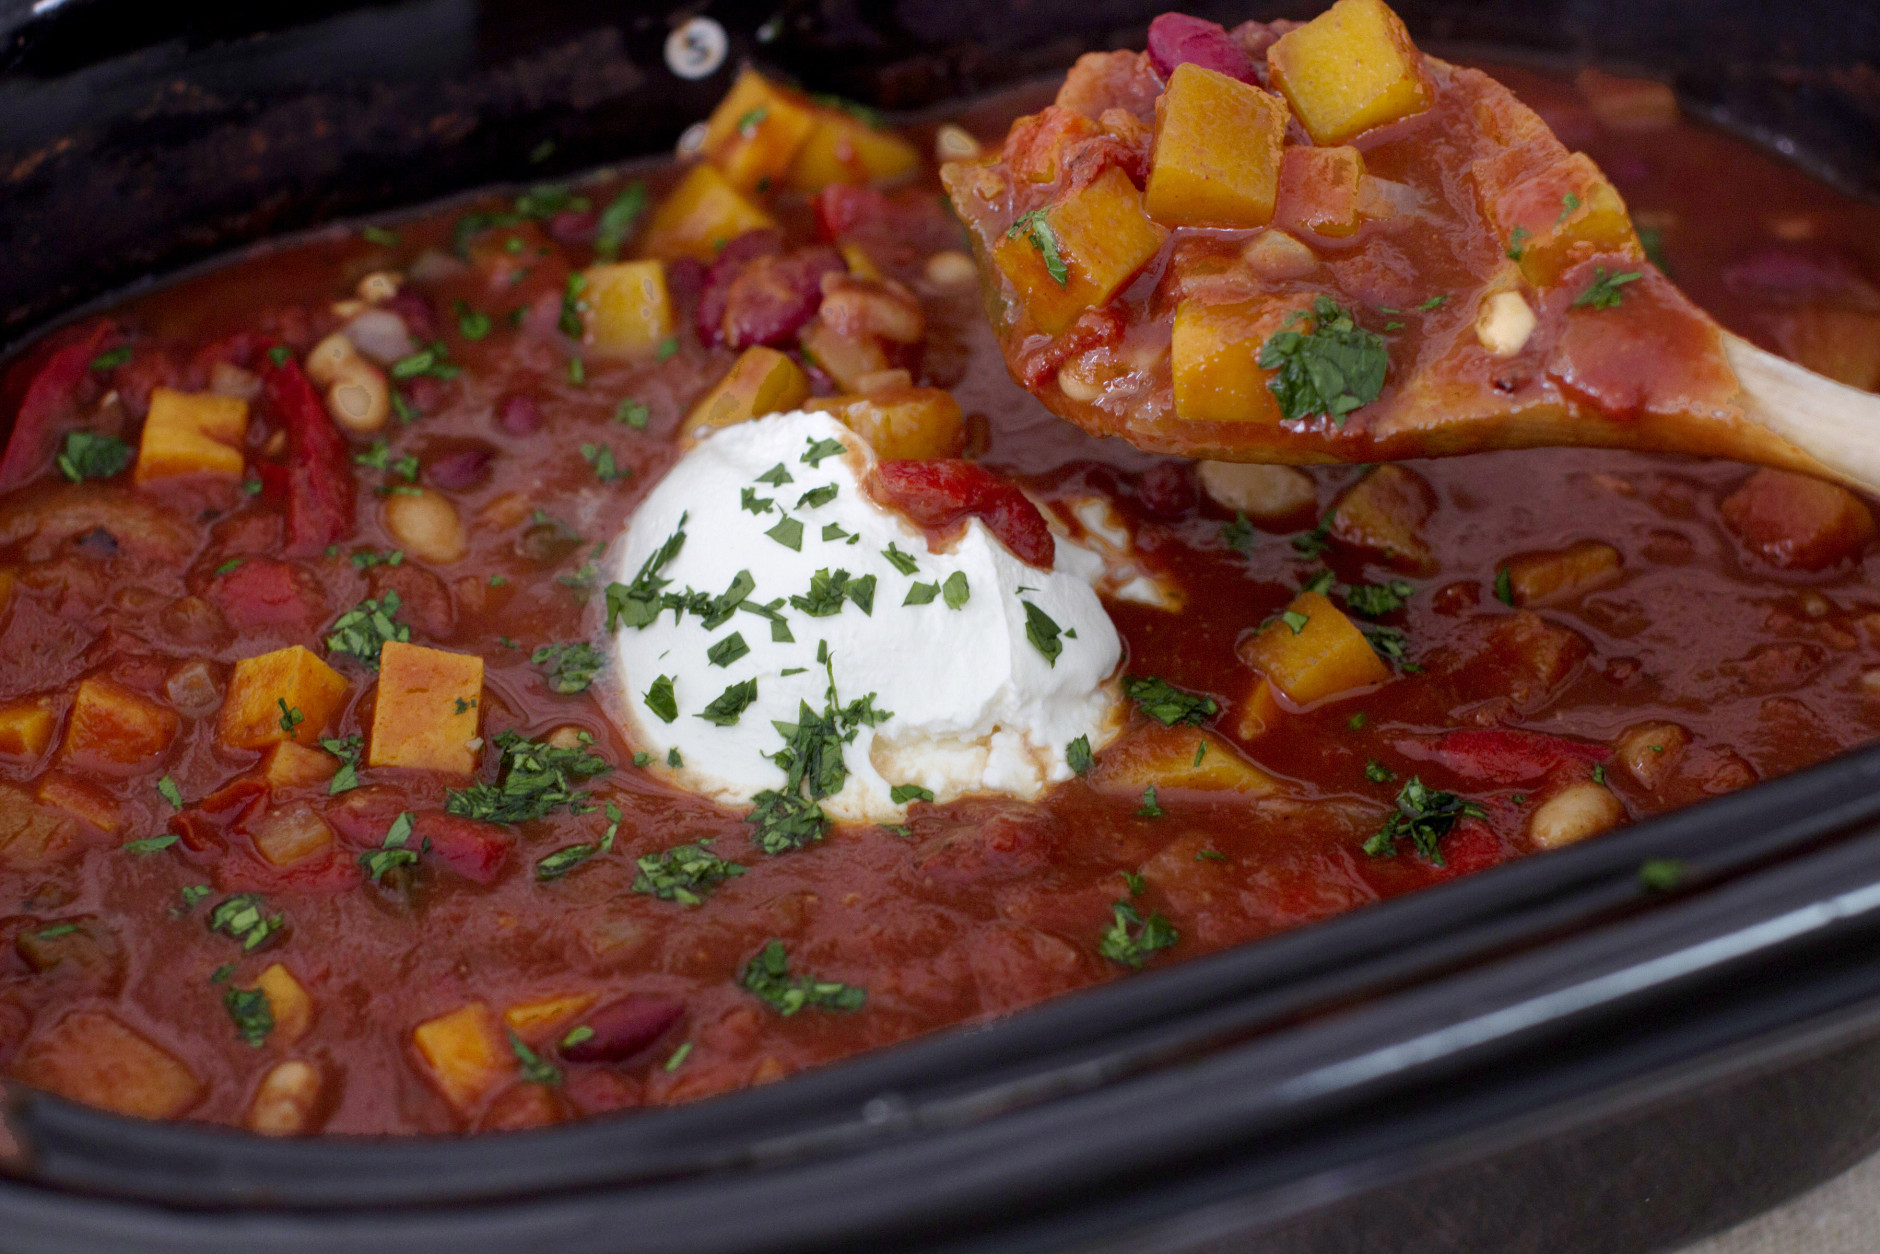 This Sept. 29, 2014 photo shows smoky slow cooker vegetarian chili in Concord, N.H. No browning or other pots needed for this dump-and-go vegetarian chili that truly takes just 10 minutes to assemble. (AP Photo/Matthew Mead)